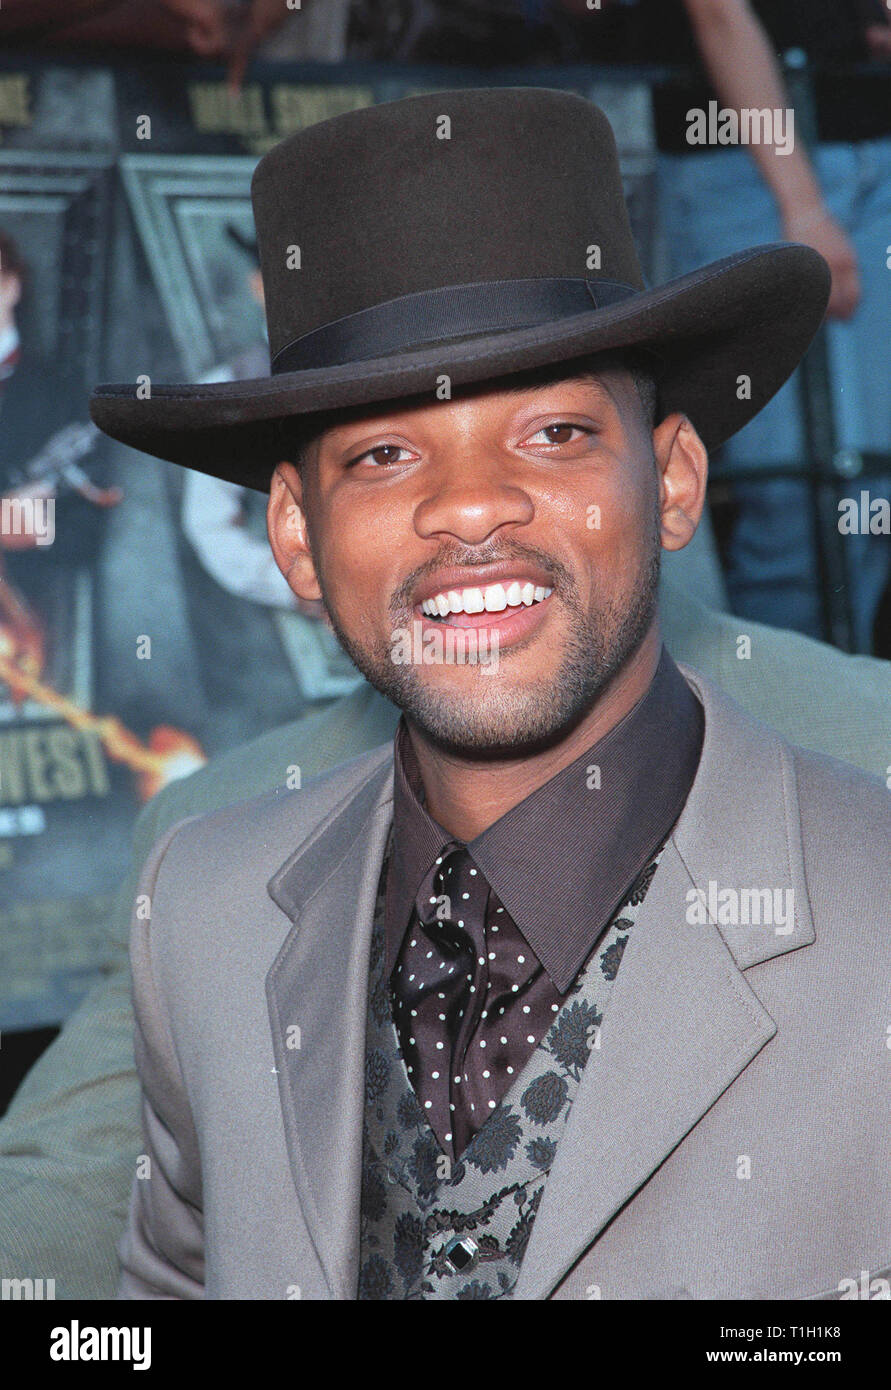 LOS ANGELES, CA. June 28, 1999: Actor WILL SMITH at the world premiere of  his new movie "Wild Wild West" in Los Angeles. © Paul Smith / Featureflash  Stock Photo - Alamy